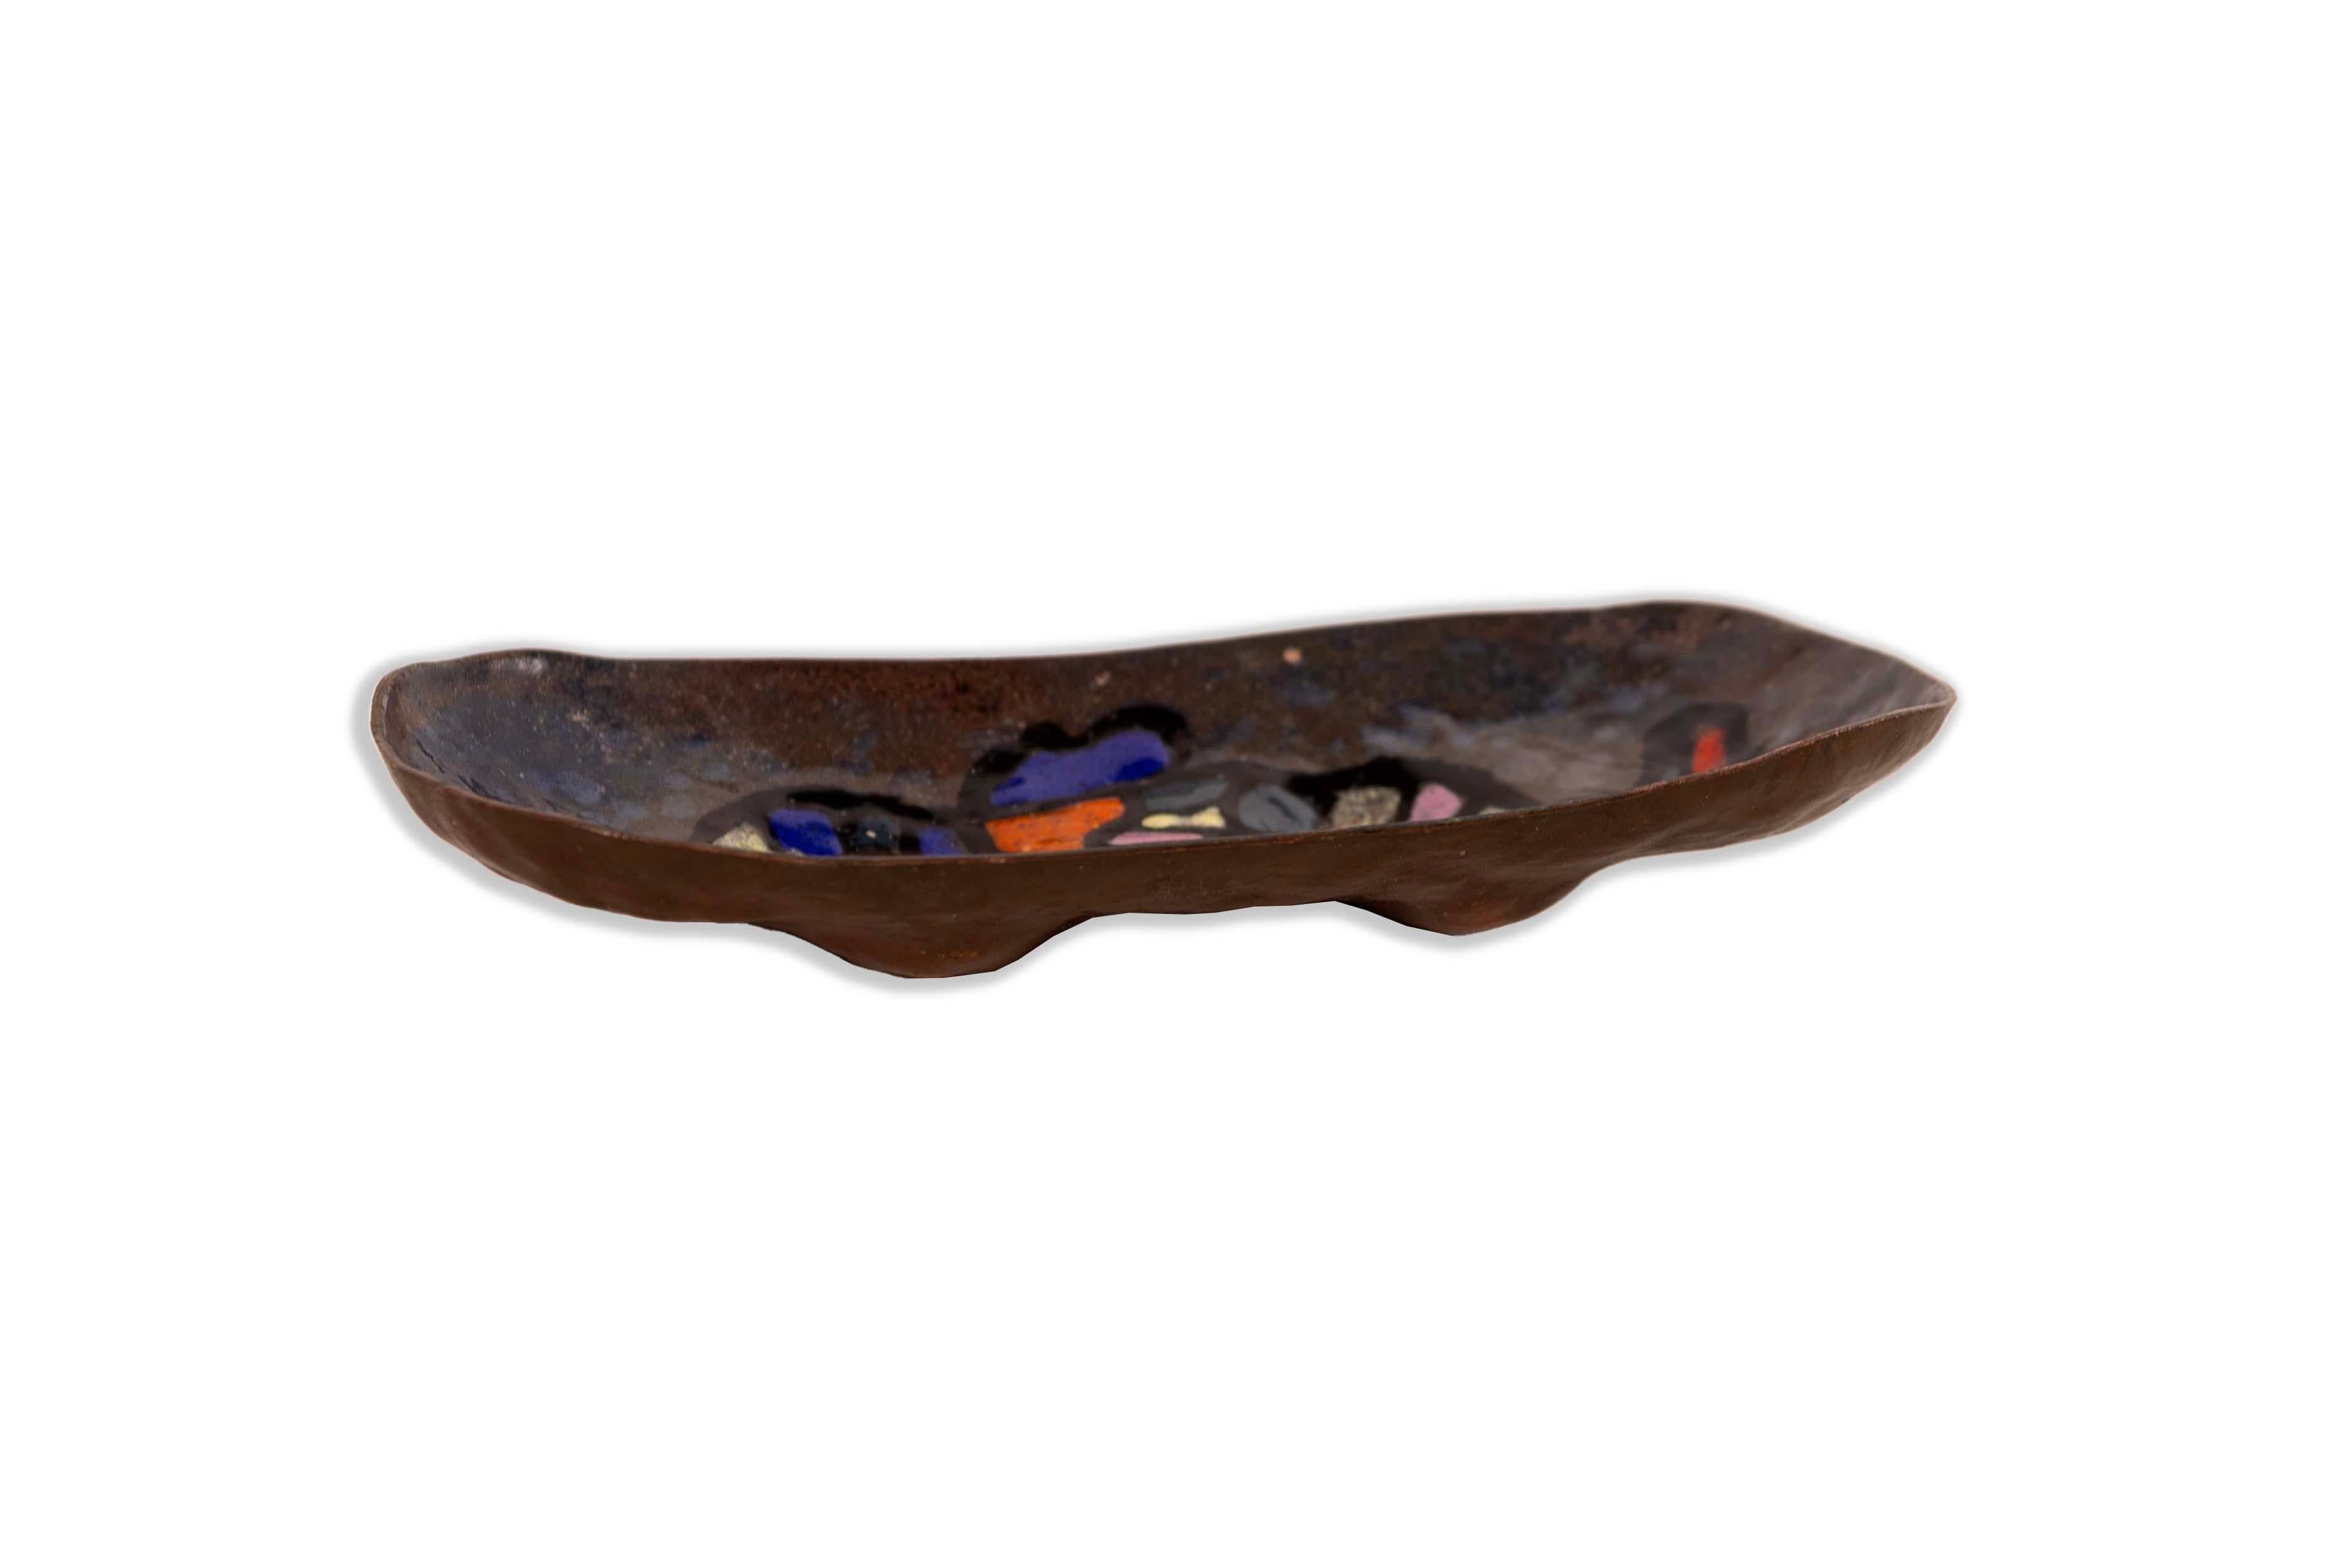 Italian Severa Made in Italy Enameled Modern Ceramic Fish Design Elongated Plate For Sale